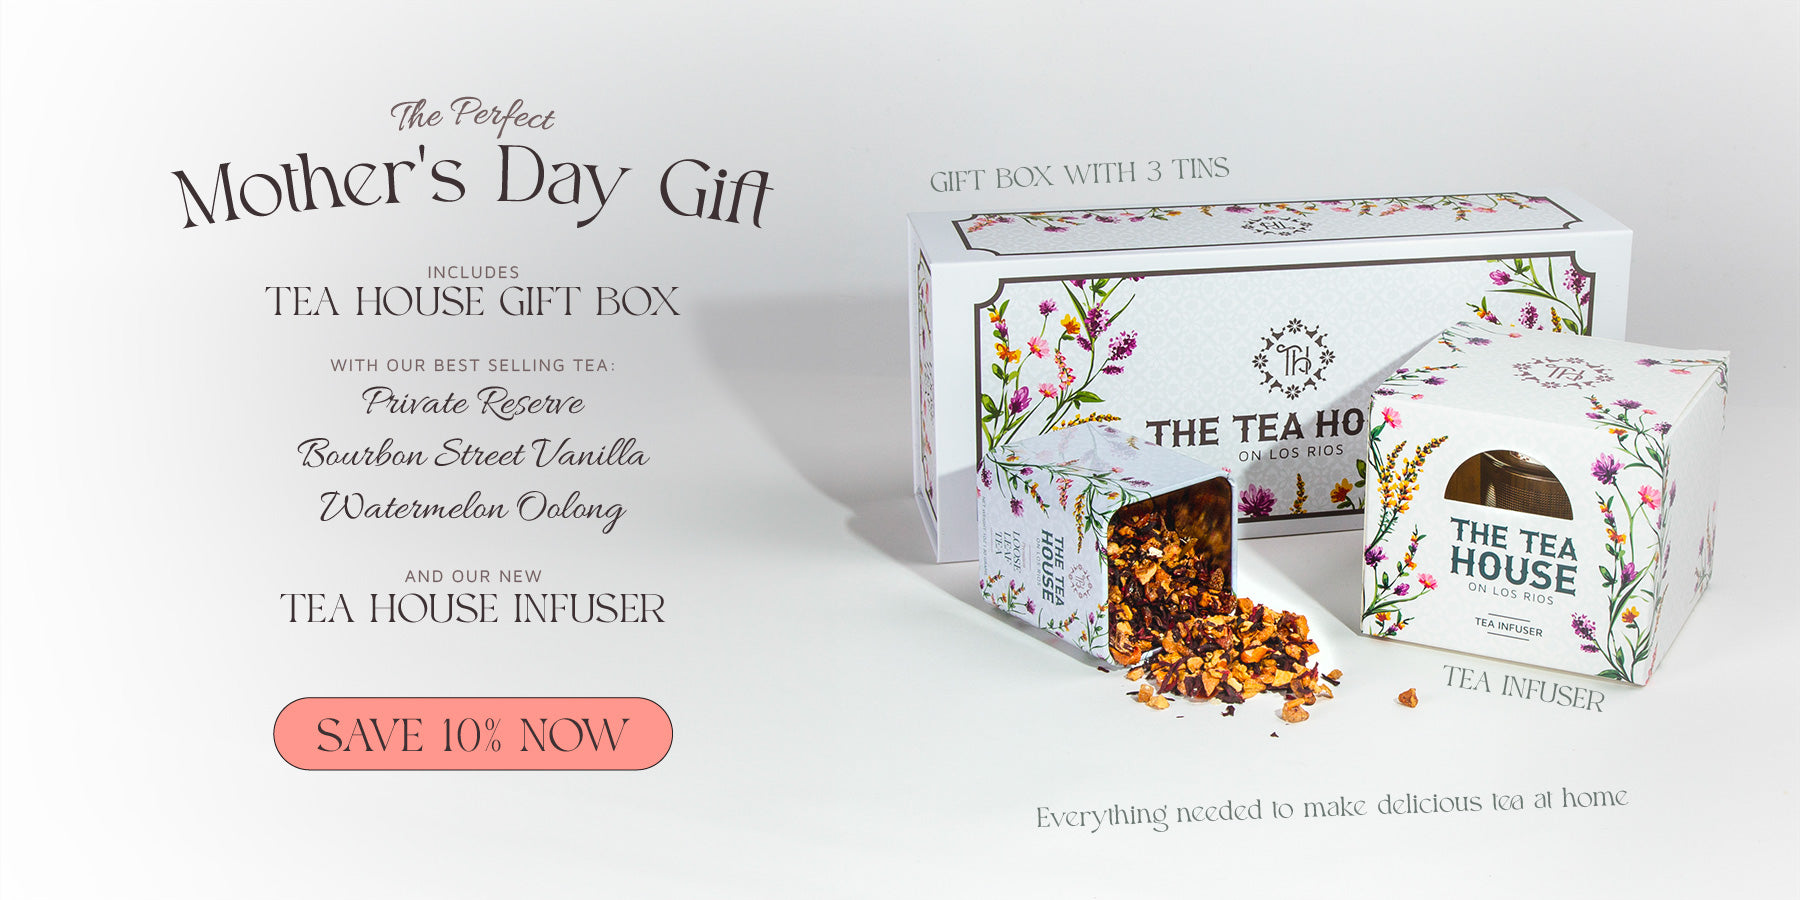 Mothers Day Gift Bundle - Includes our gift box and tea infuser!